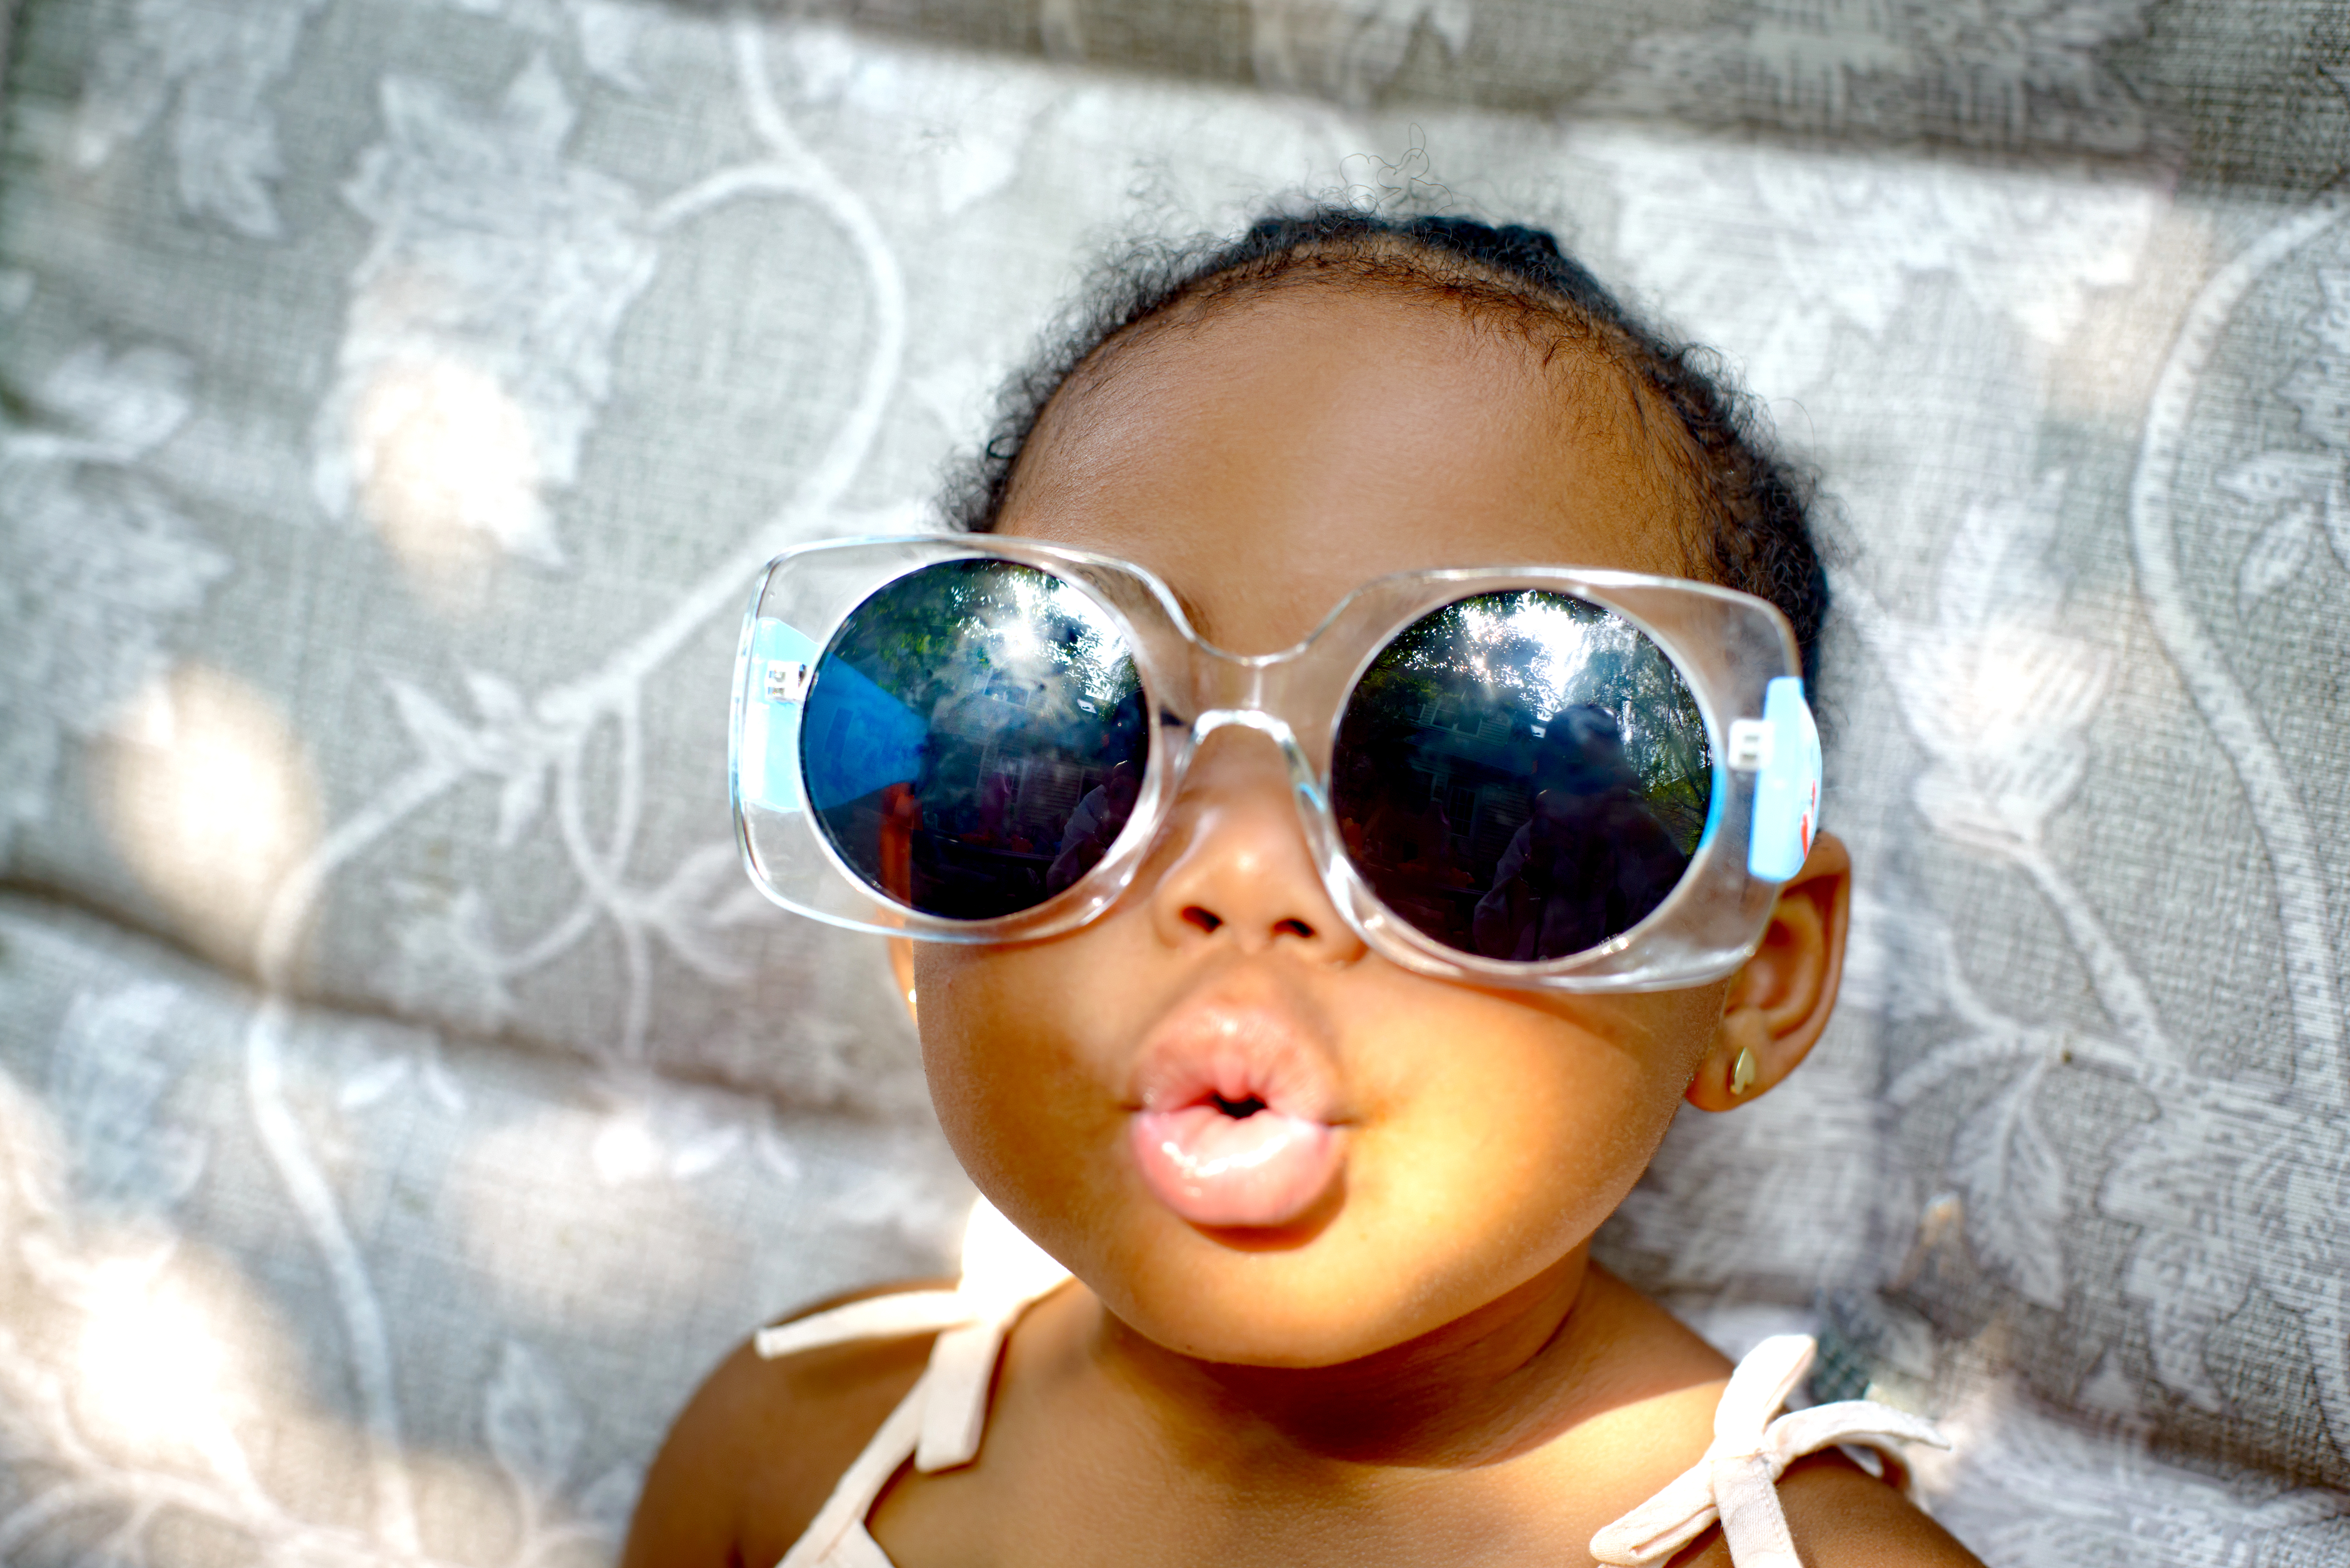 Baby girl sitting on lounge chair wearing sunglasses, portrait